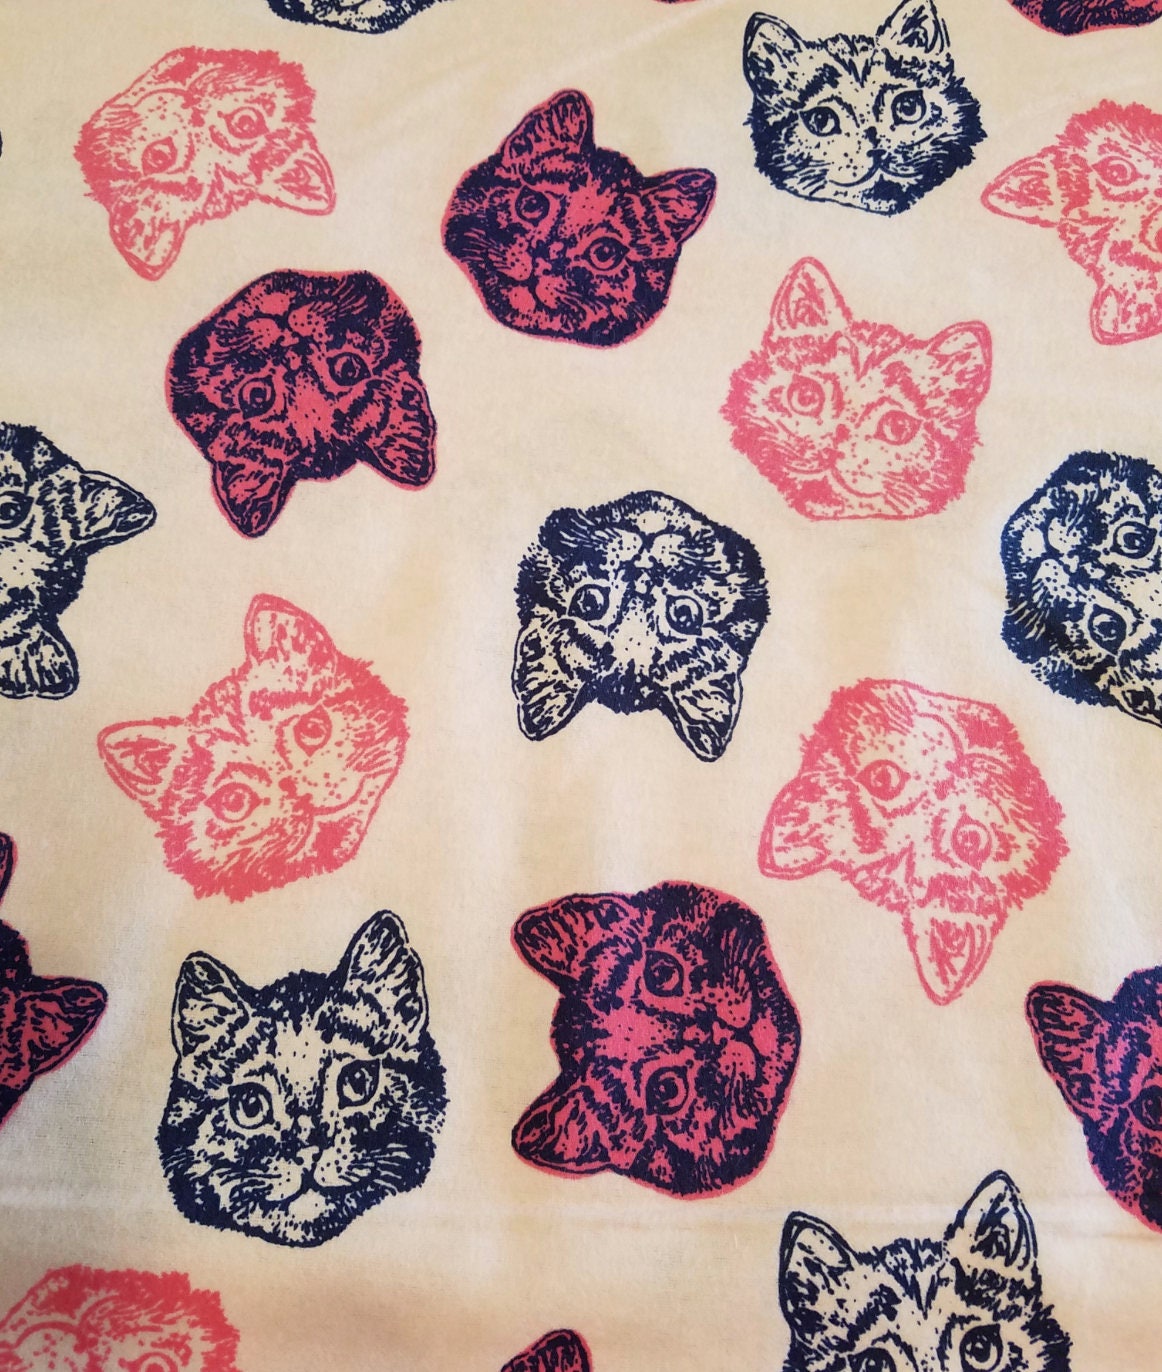 Kitty Cats, Weighted Blanket, Cotton Flannel, Up to Twin Size, 3 to 20